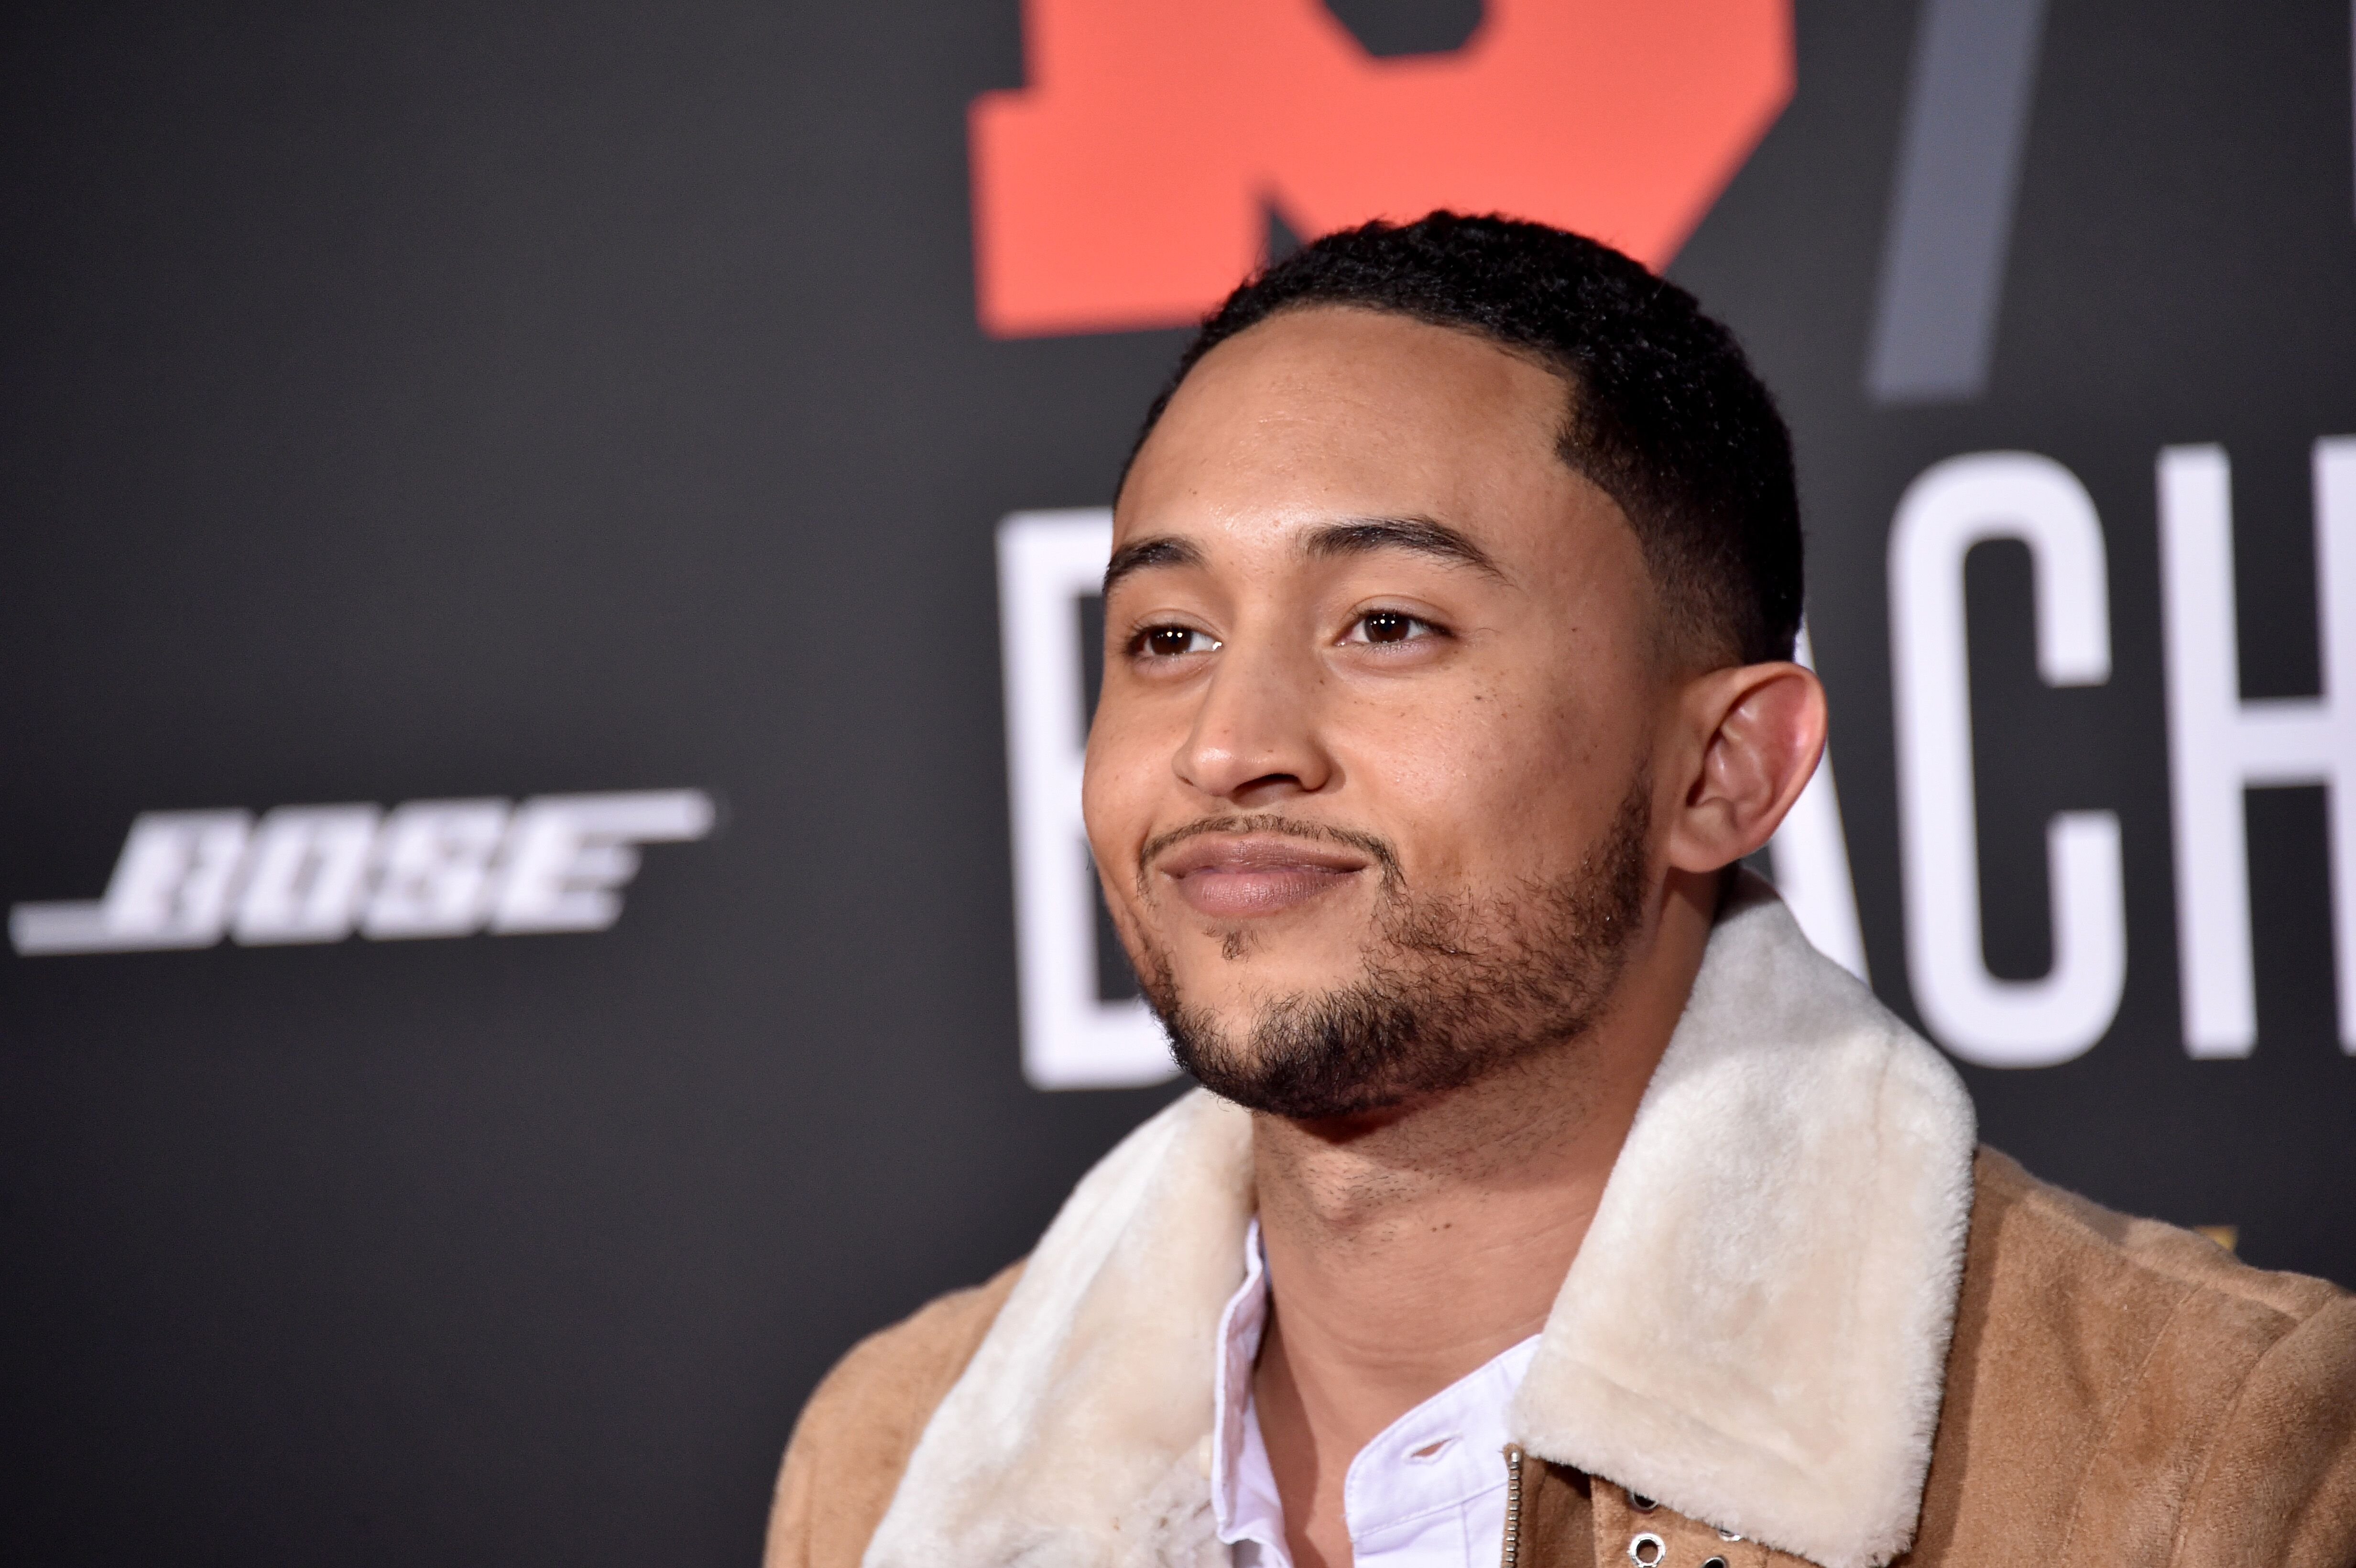 Tahj Mowry during the Bleacher Report Bleacher Ball on February 5, 2016 in San Francisco, California | Photo: Getty Images